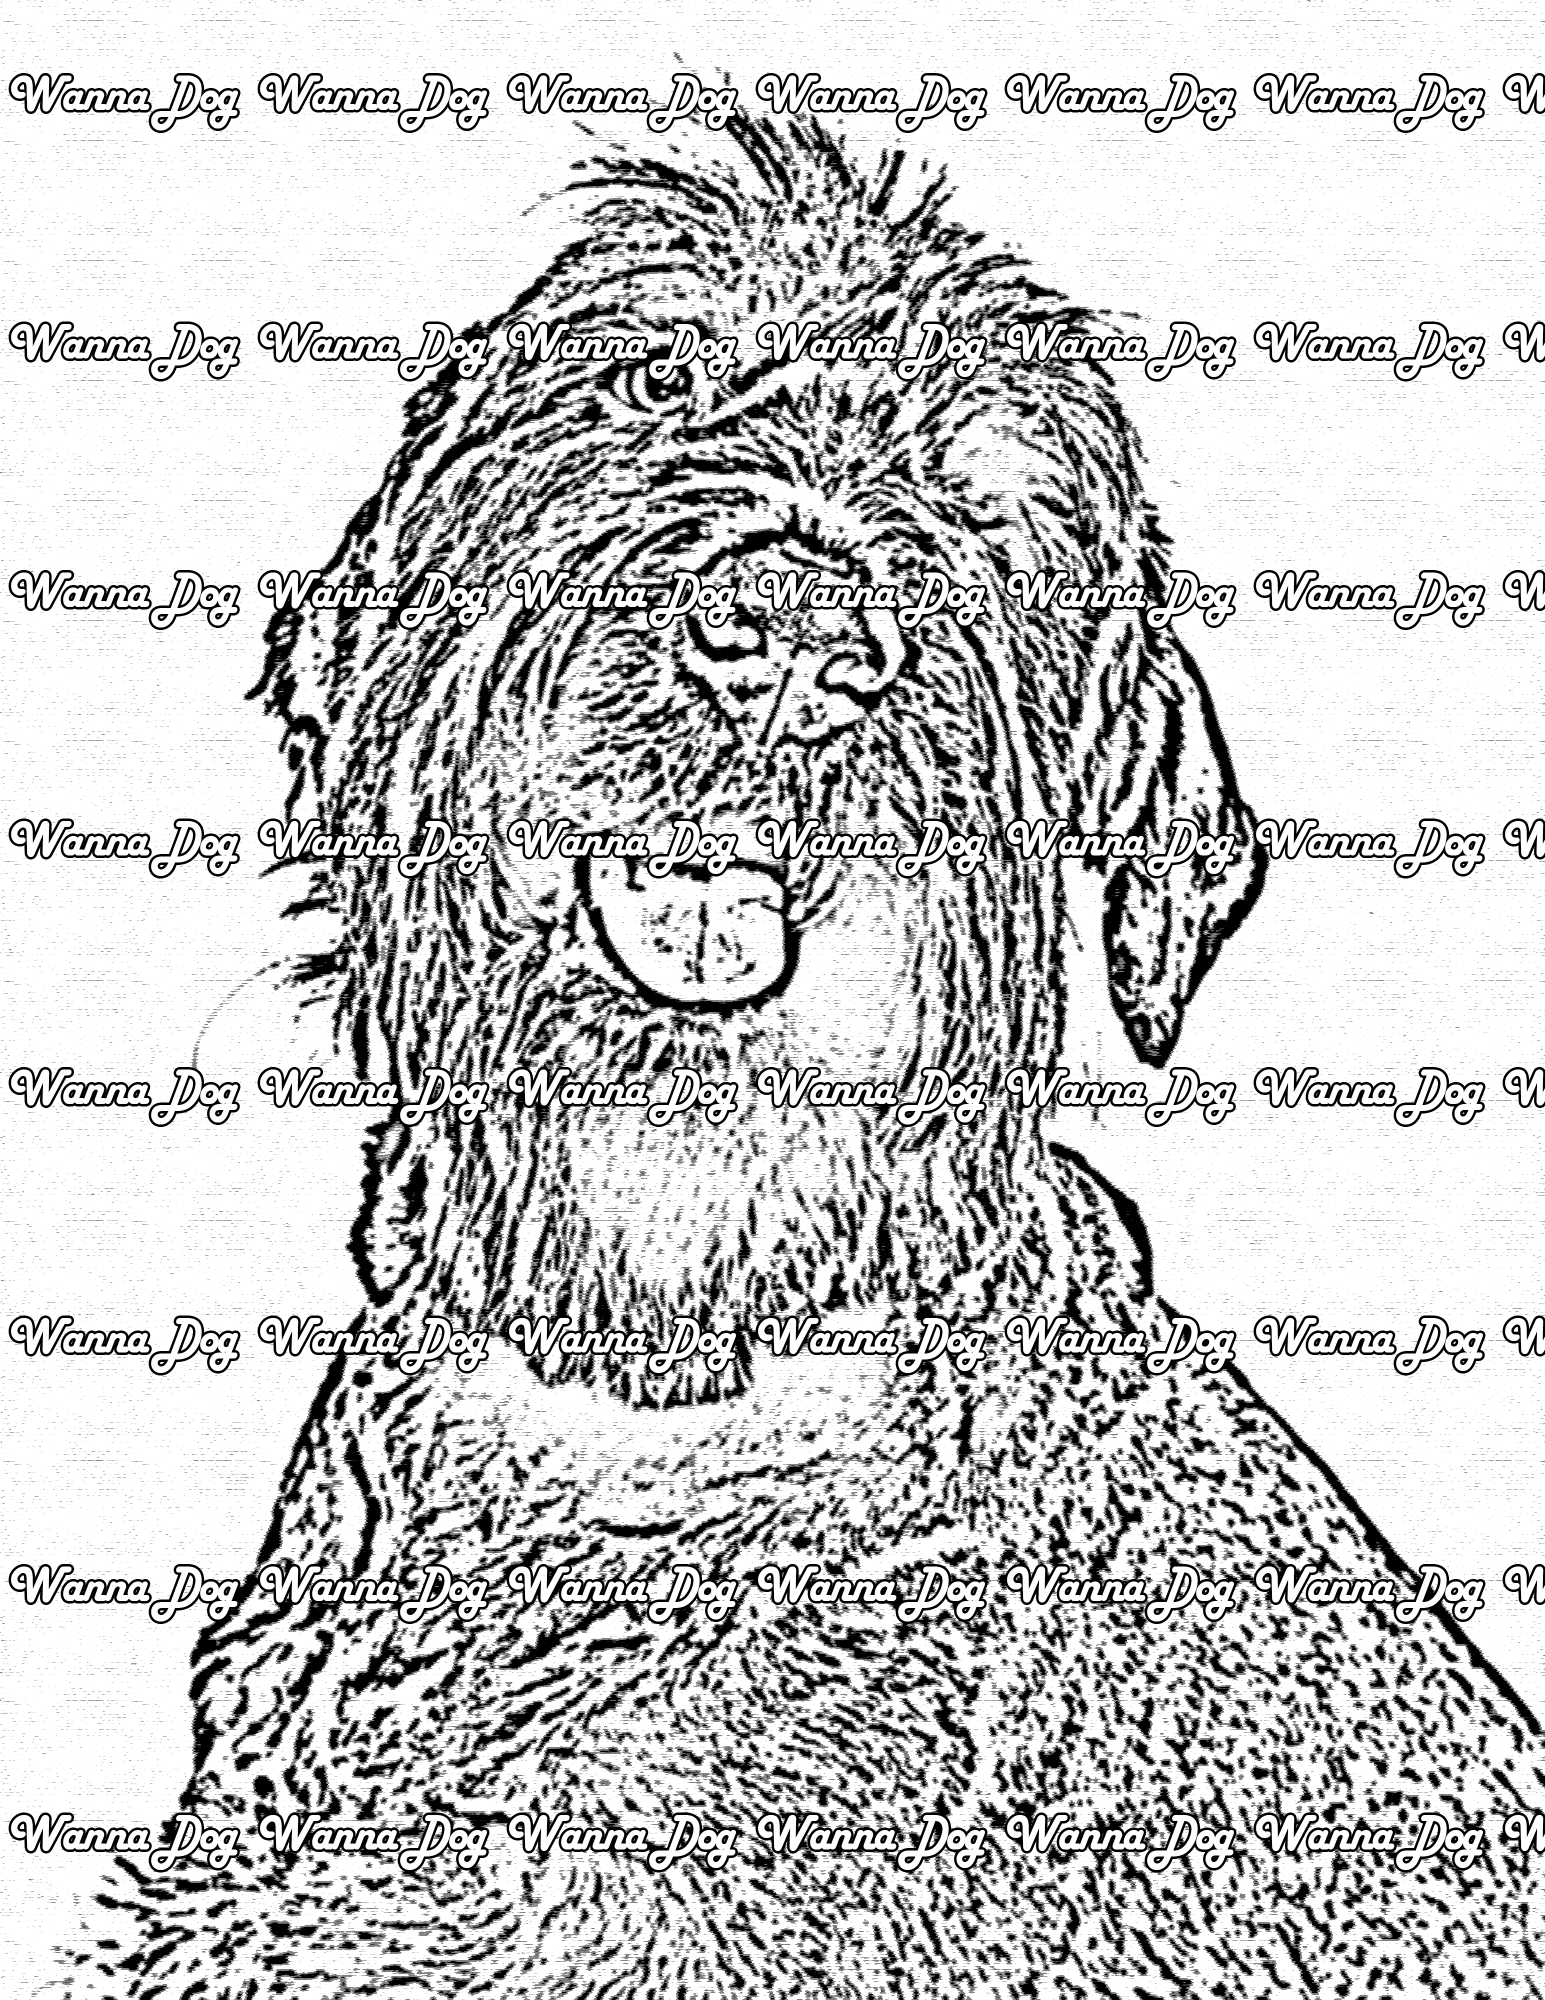 Schnauzer Coloring Page of a Schnauzer posing with the head tilted to the side